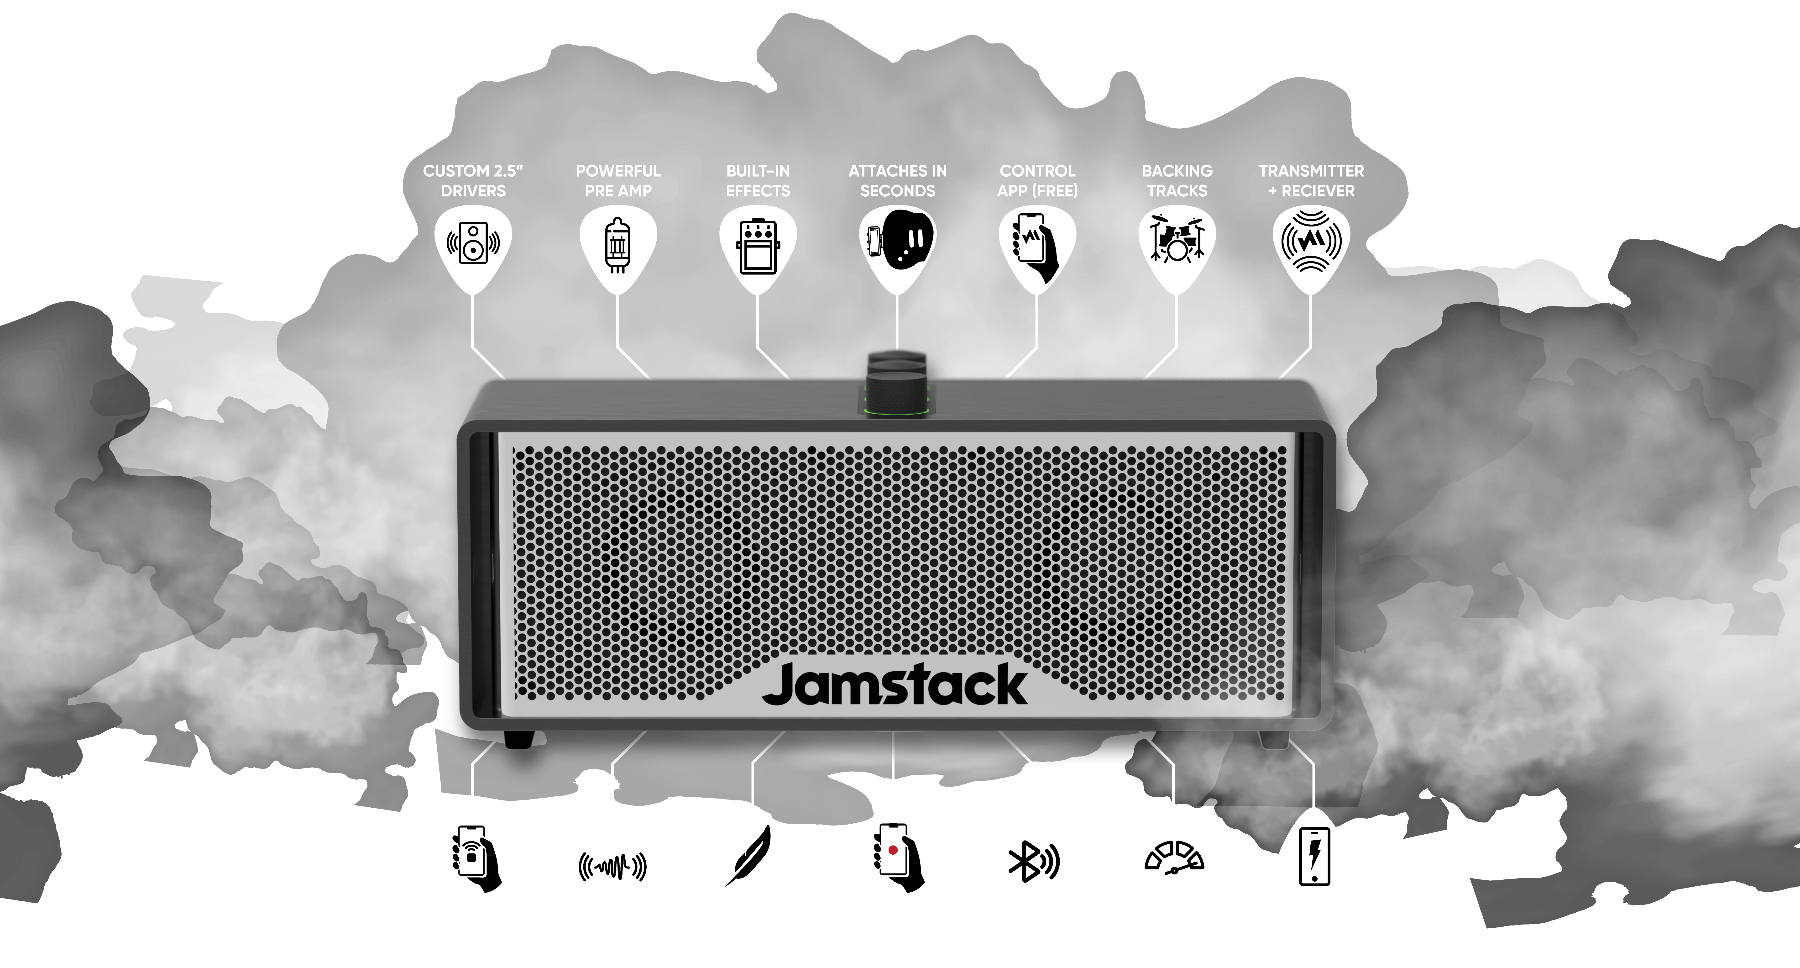 Jamstack overview